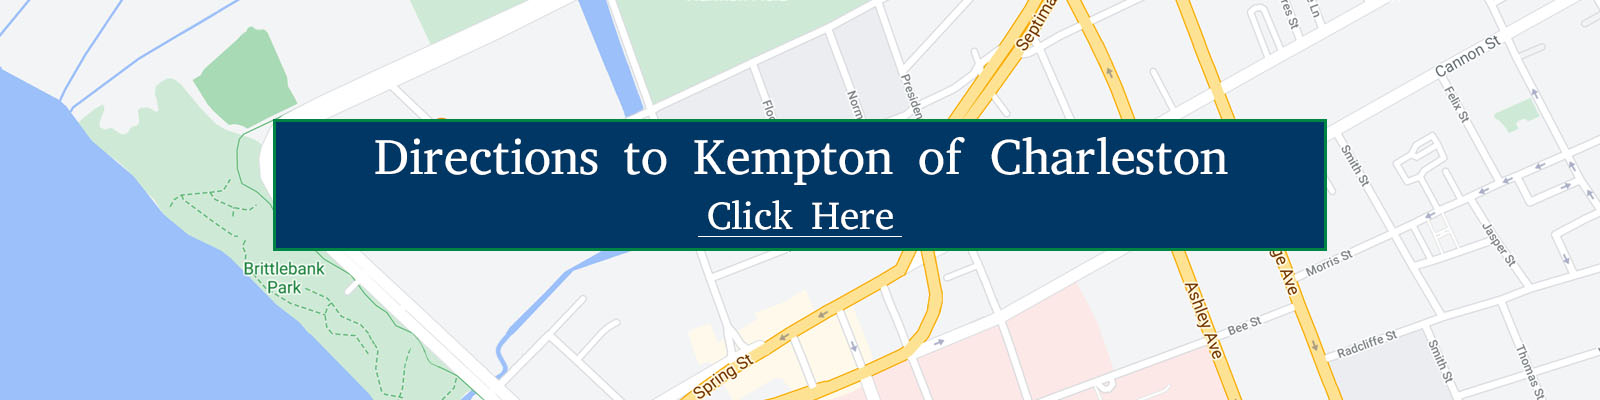 Directions and Map to Kempton of Charleston